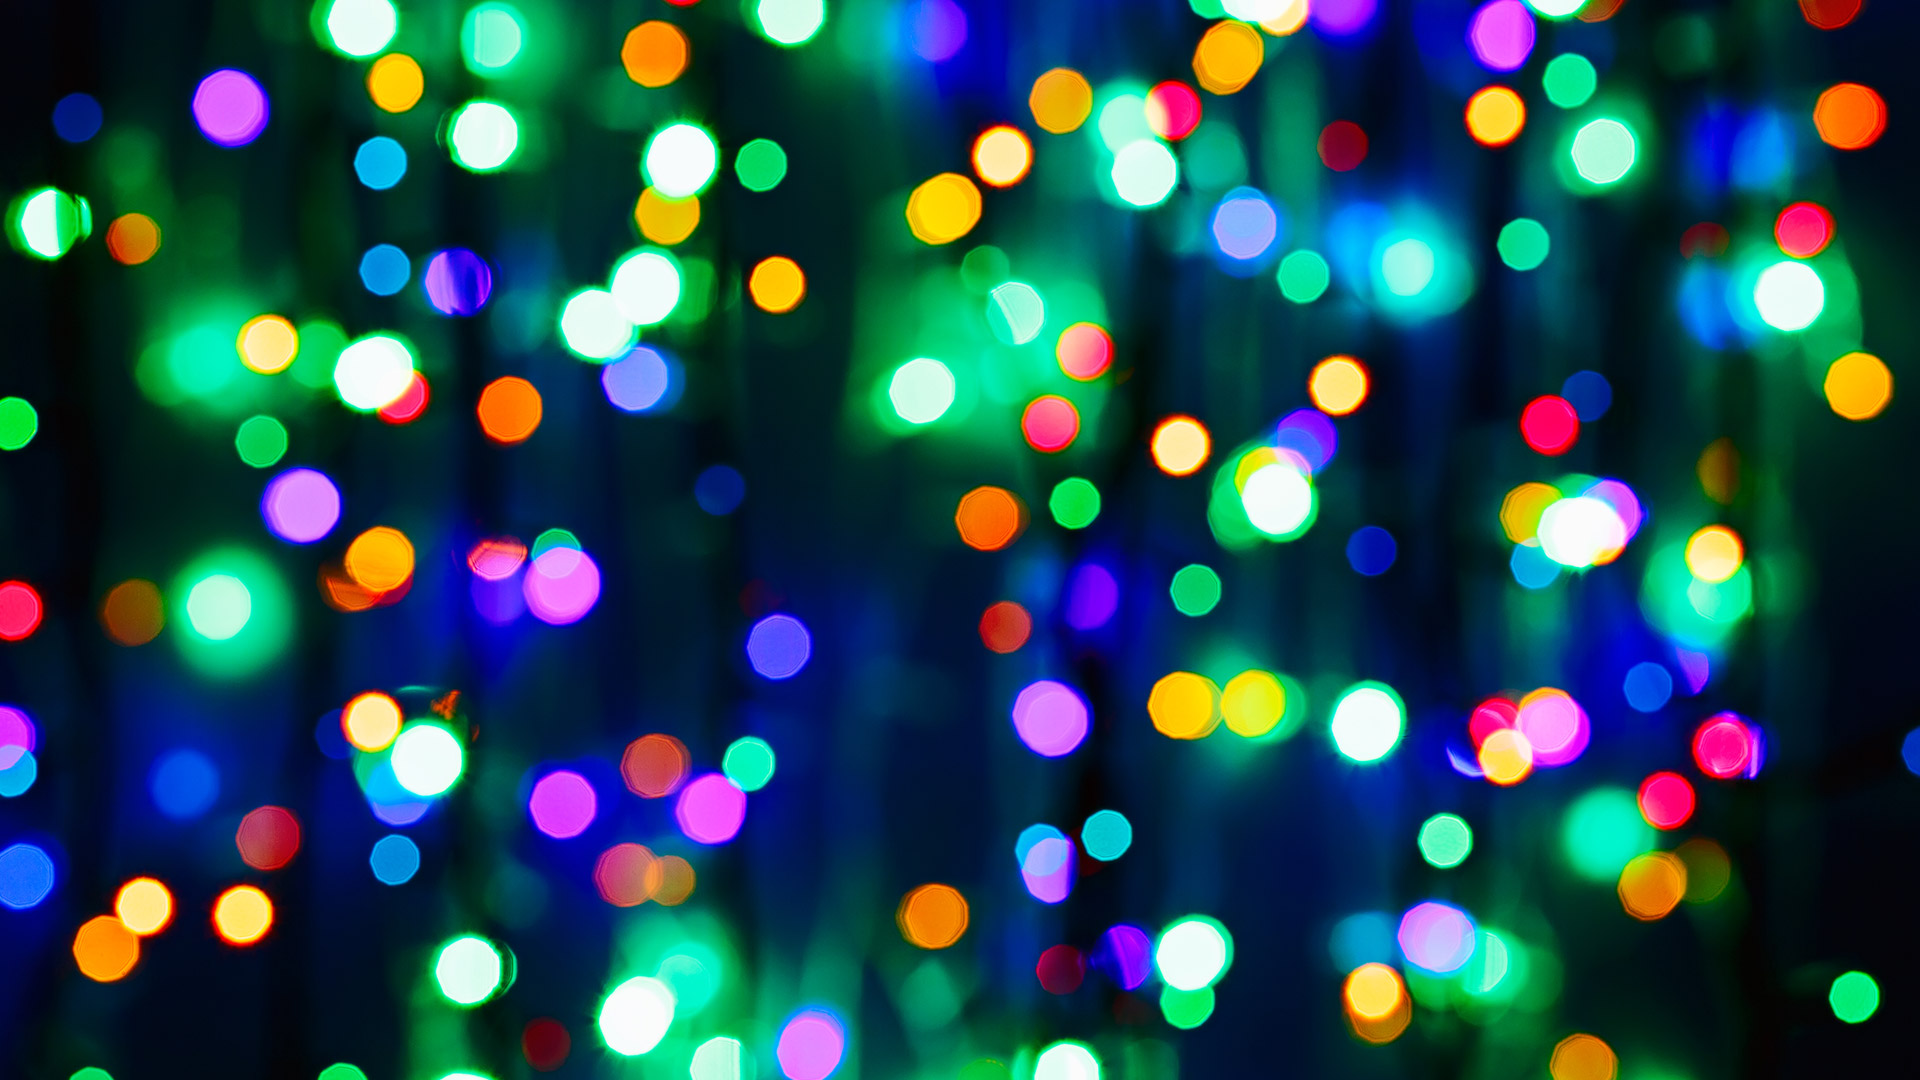 LED Bulbs Are Crucial for Your Holiday Lighting This Year